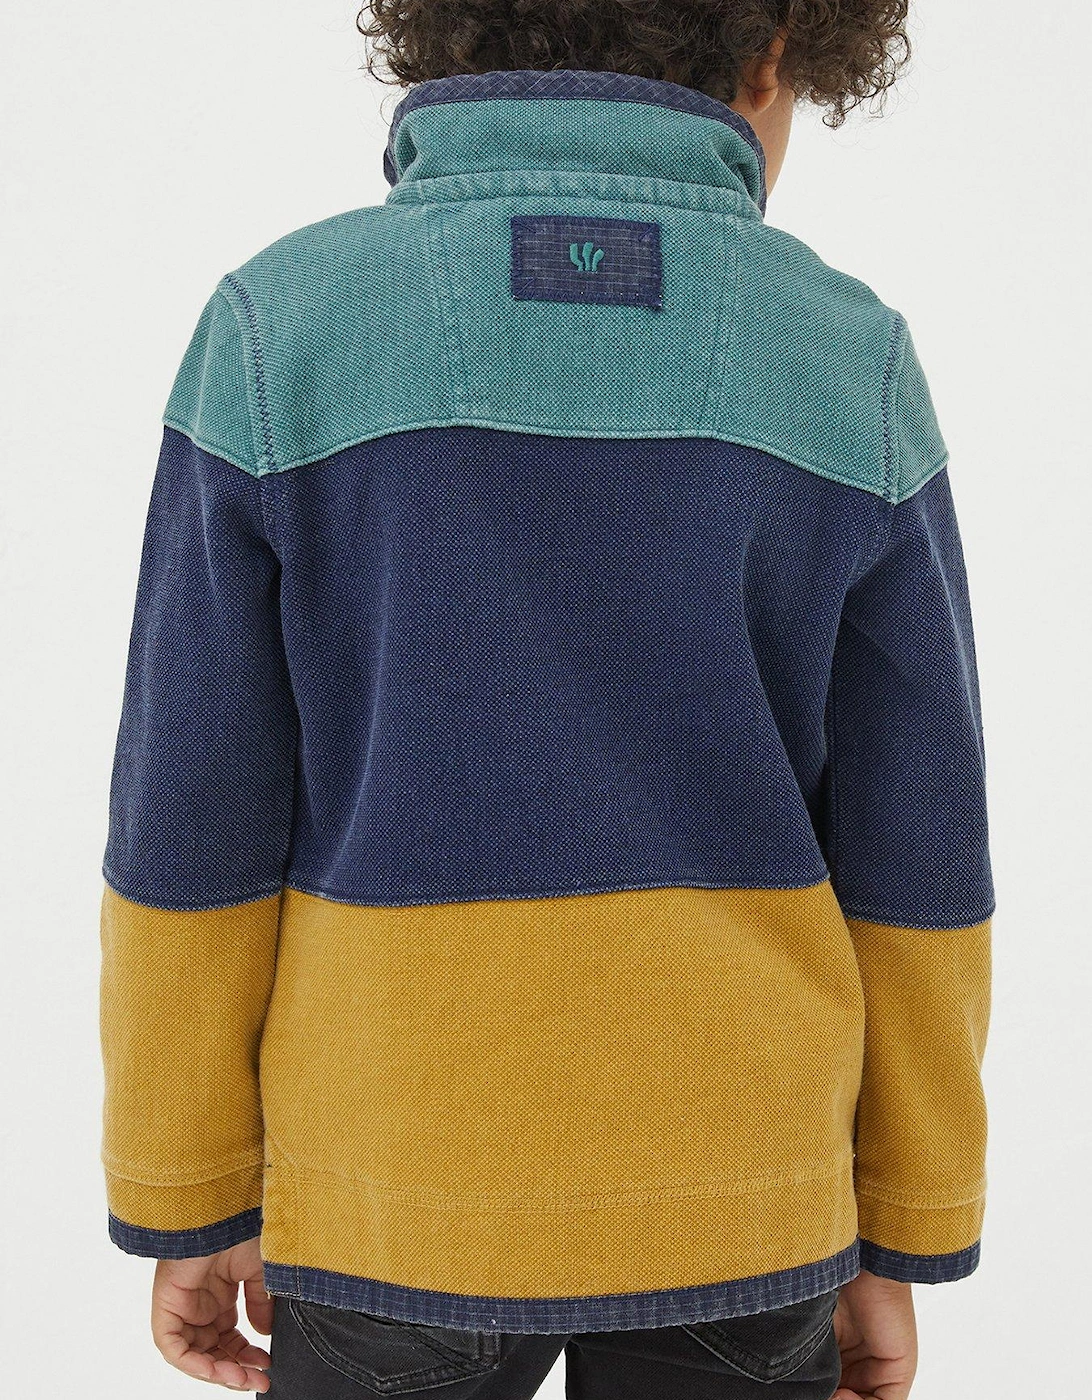 Boys Airlie Rugby Sweater - Blue